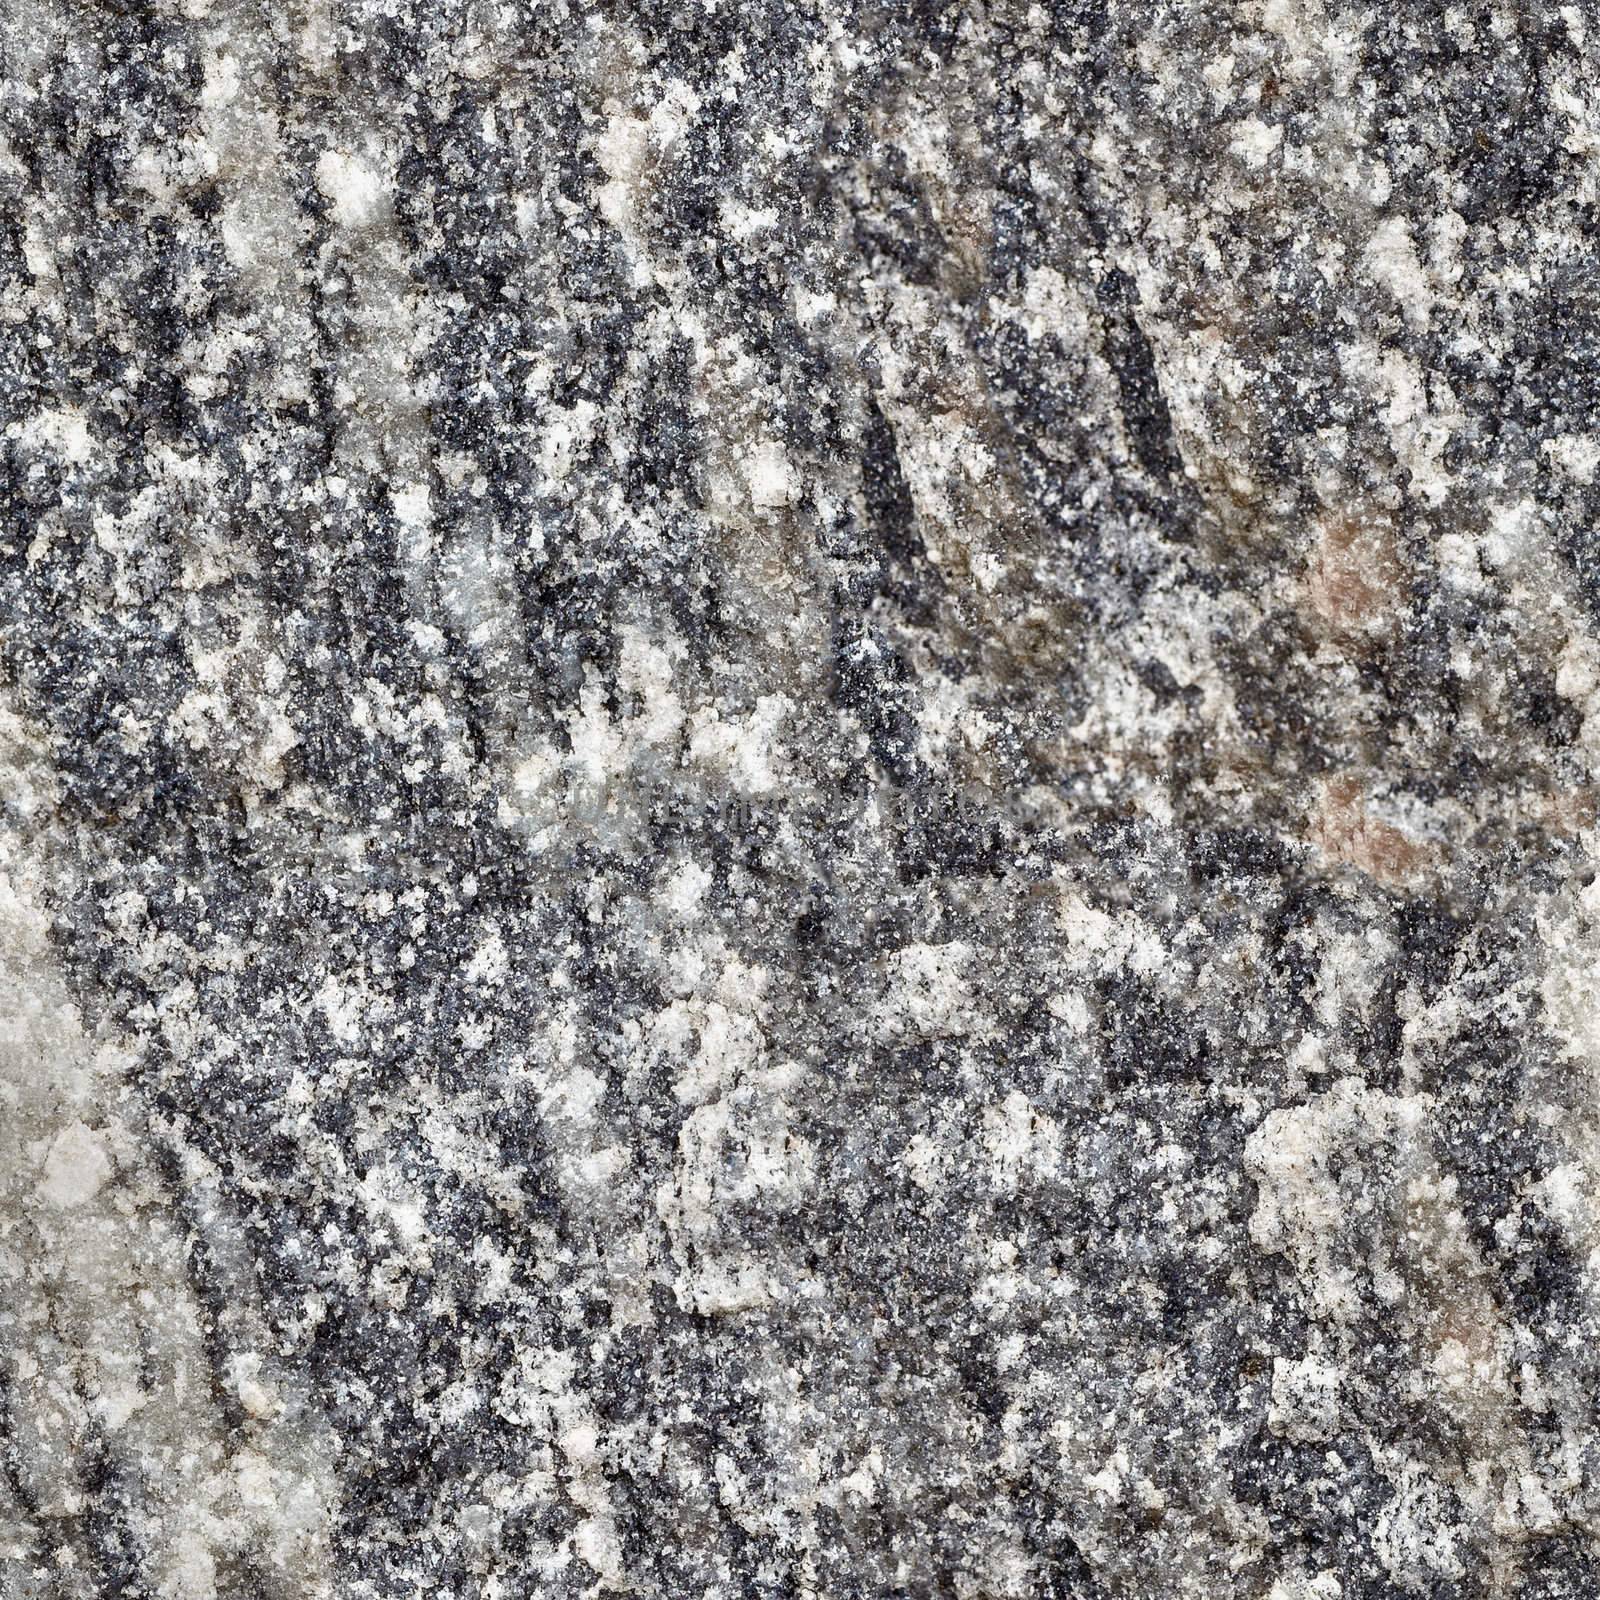 Seamless texture - rough, raw stone surface